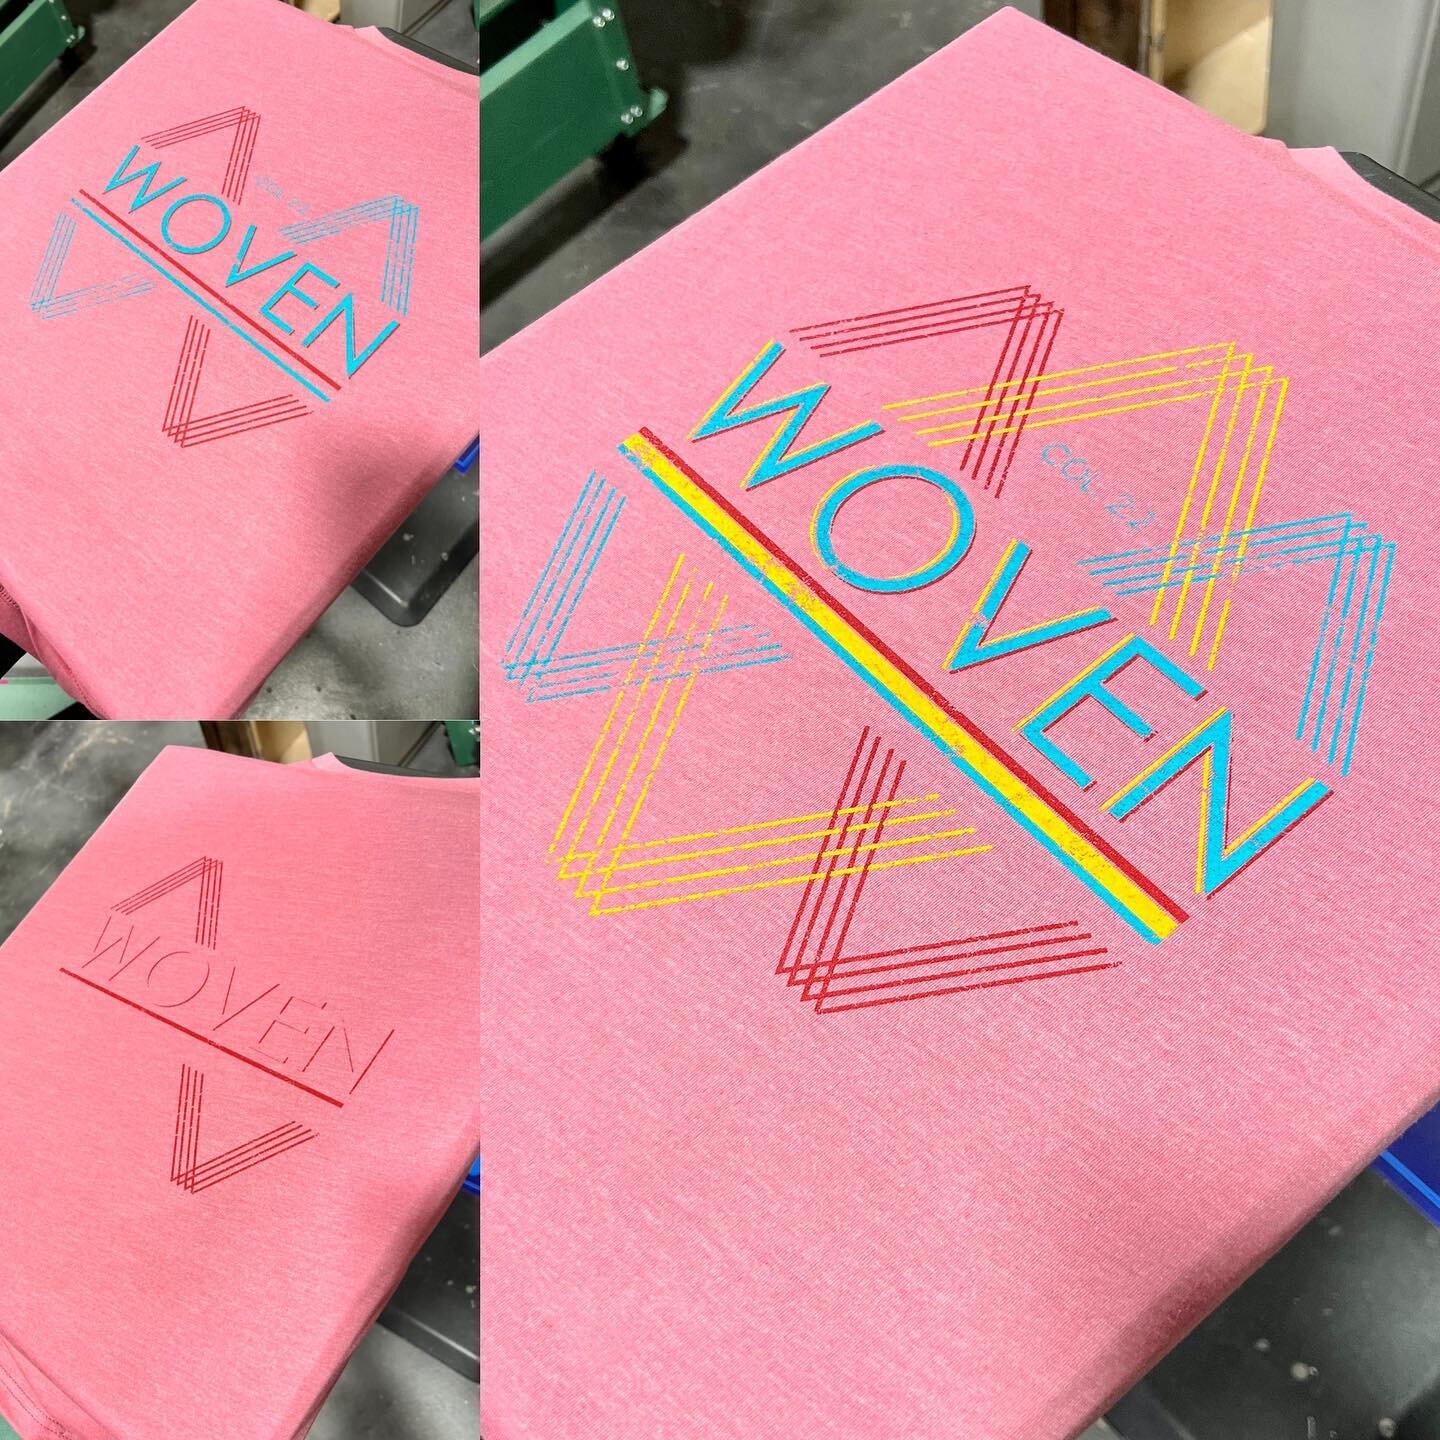 Need custom shirts? Contact us today for a quote! 

#moonmanprinting #roswellnm #customshirts #screenprintedshirts